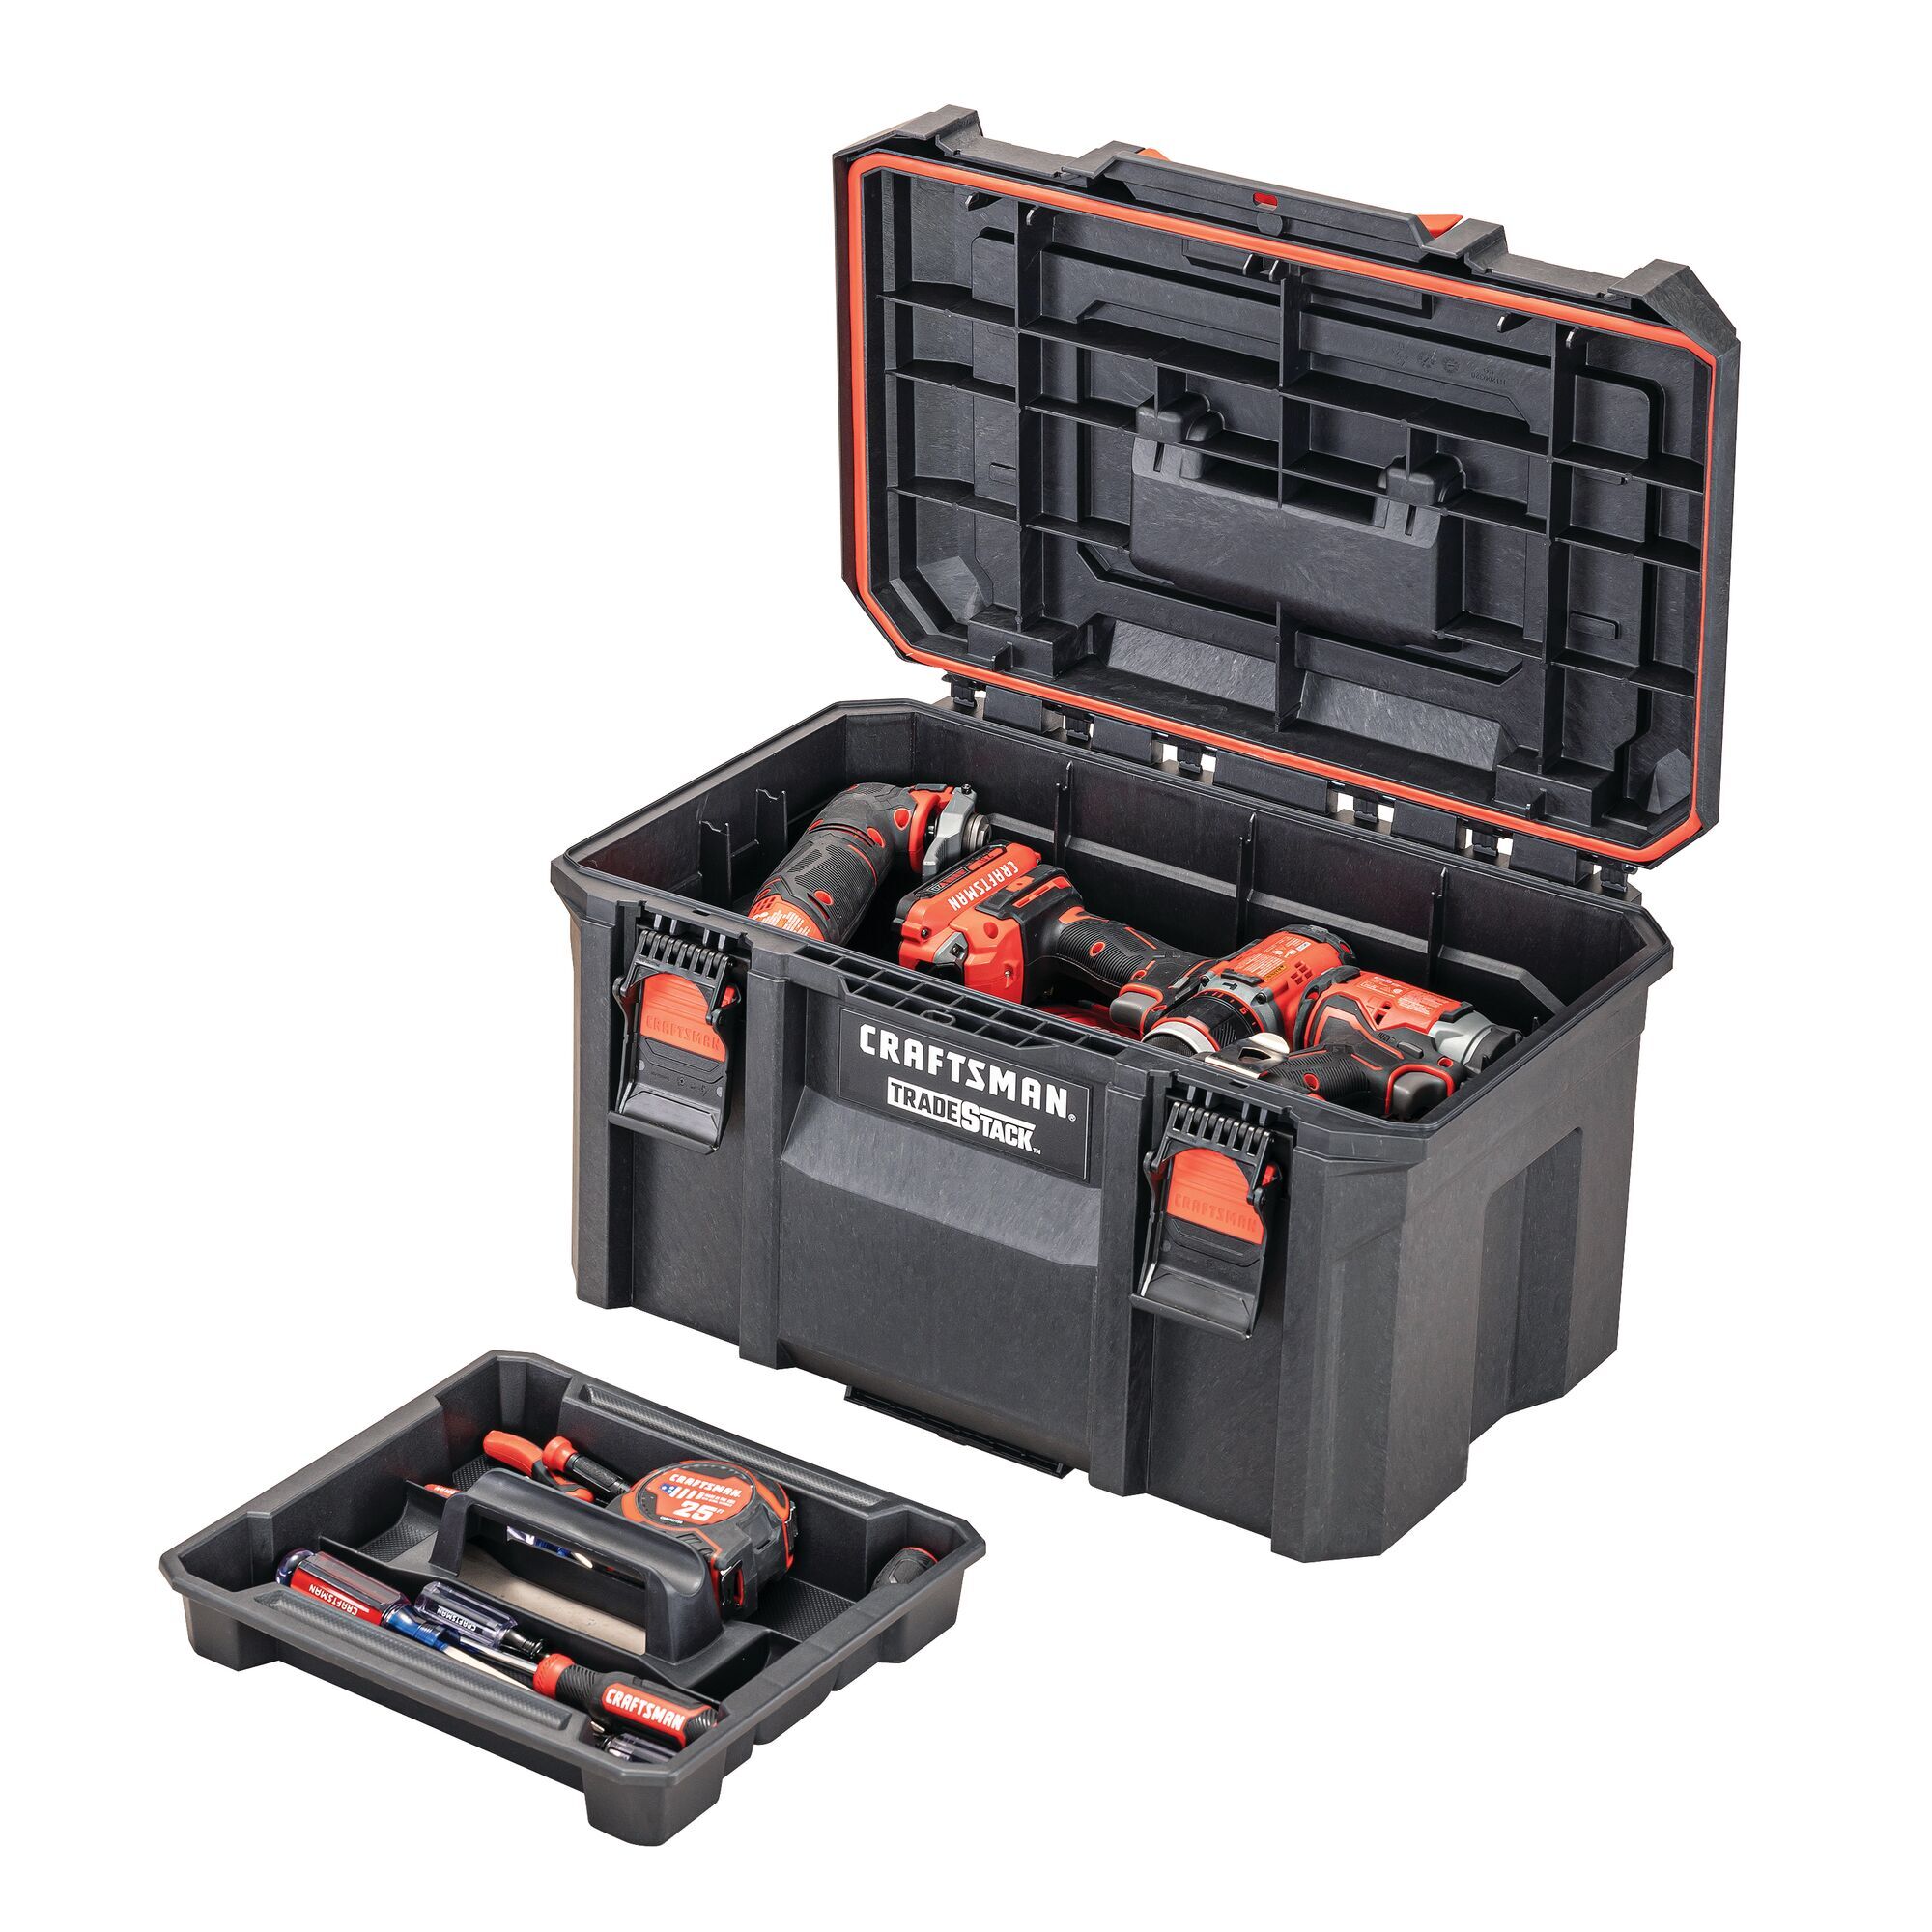 View of CRAFTSMAN Storage: Tradesystem and additional tools in the kit